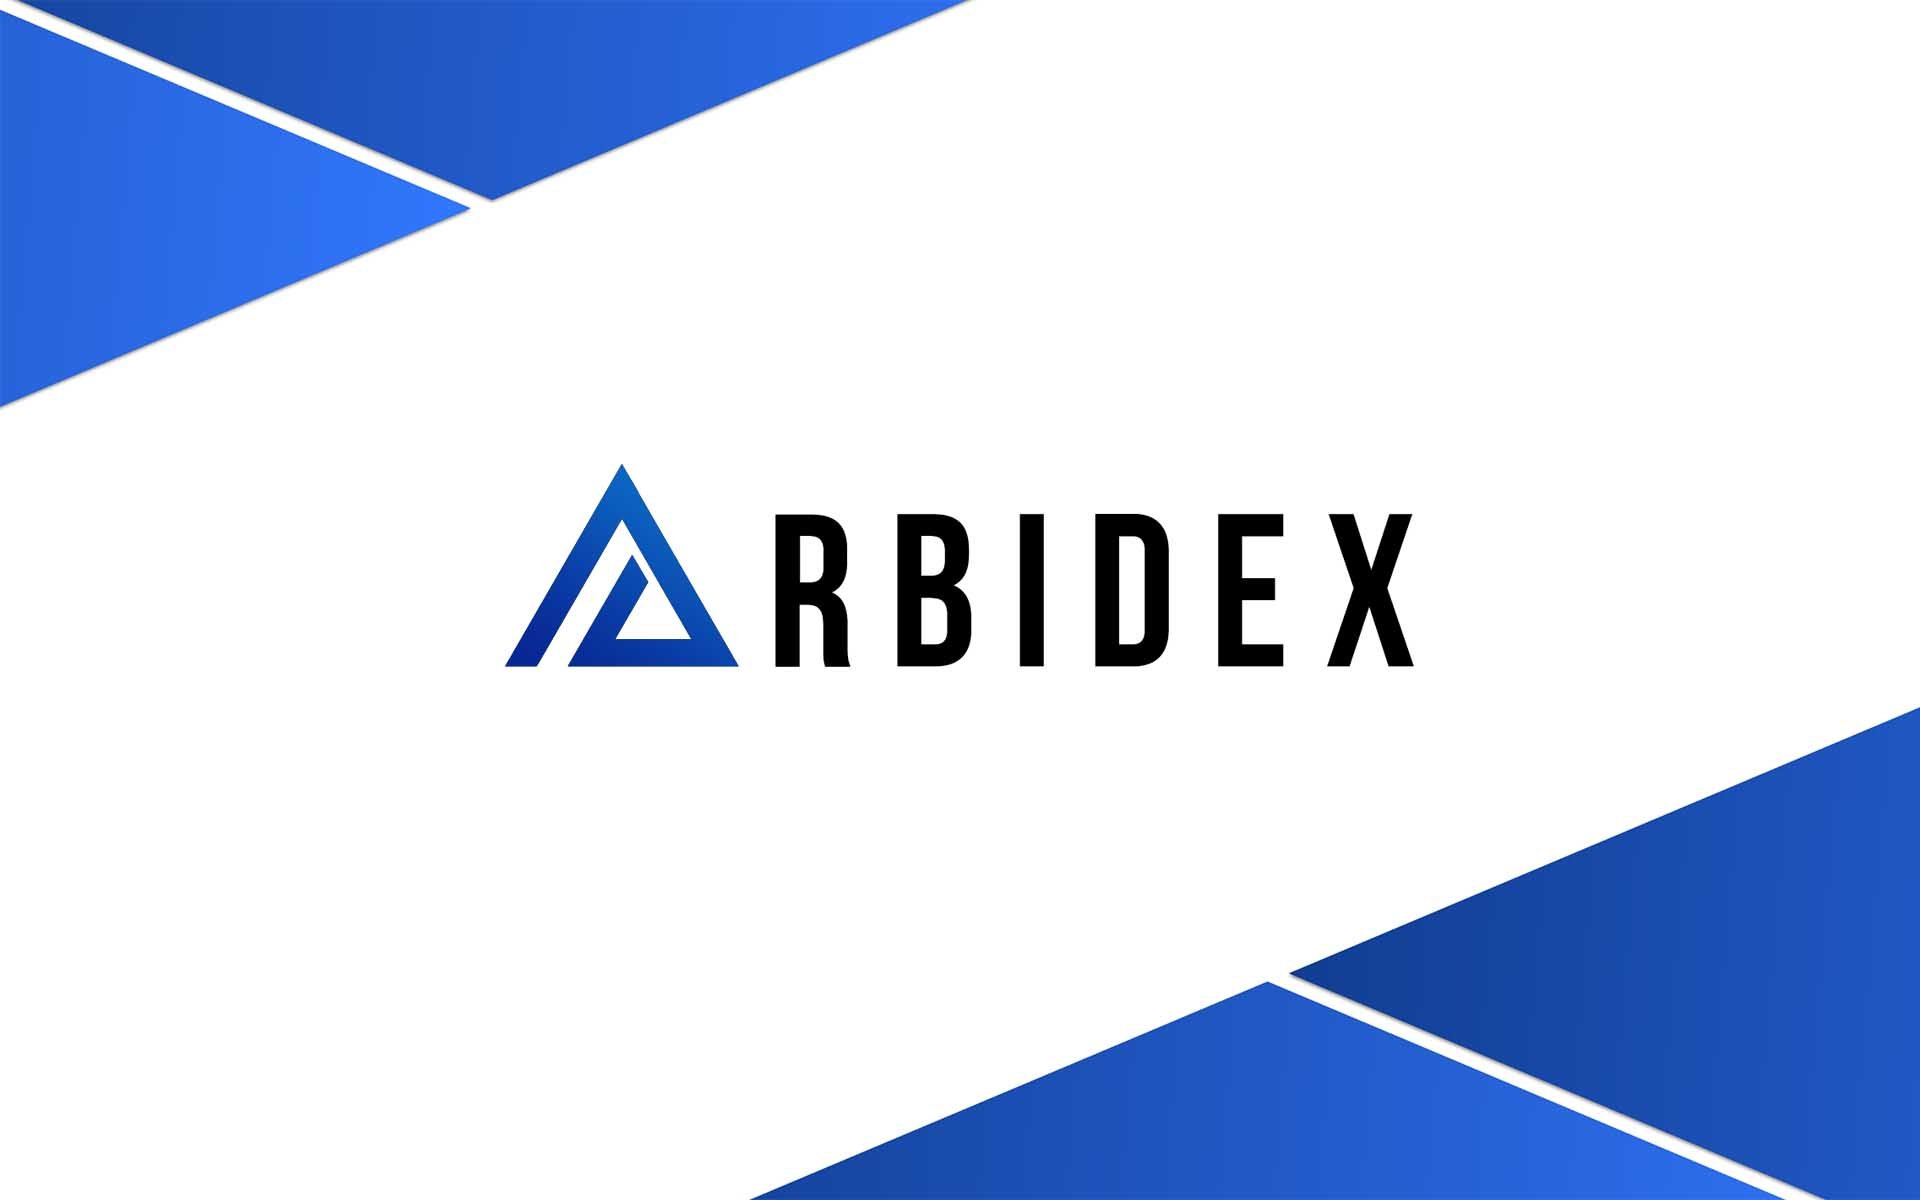 Forget About Registration at Crypto Exchanges - Arbidex Announces Crowdsale